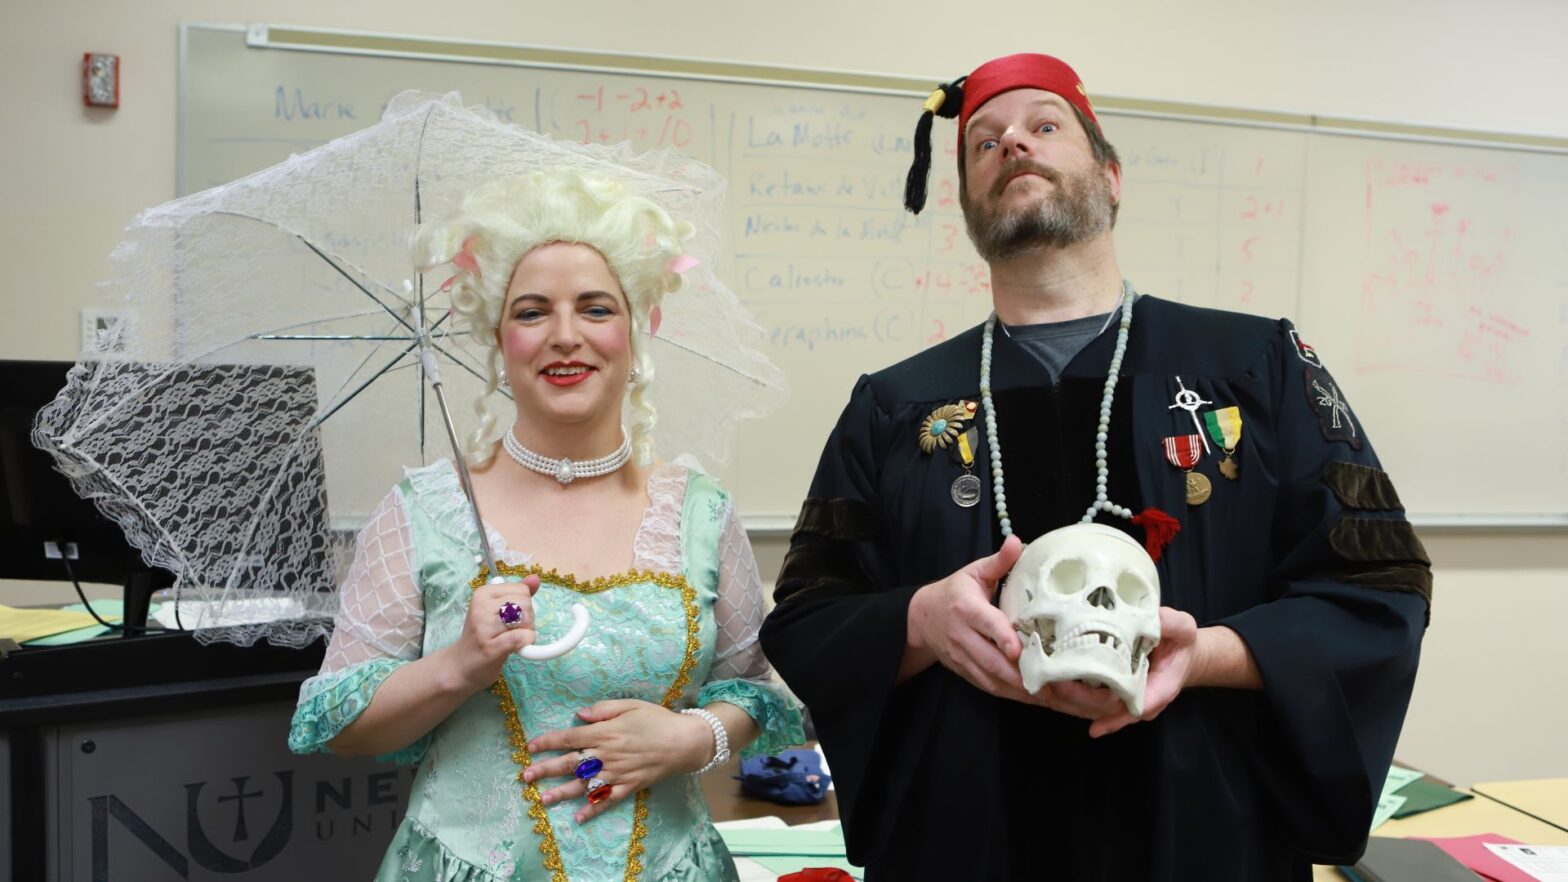 Ferguson (left) dressed as Marie Antoinette for “The Diamond Necklace Affair” game during the Reacting Game Development Conference at Newman University.